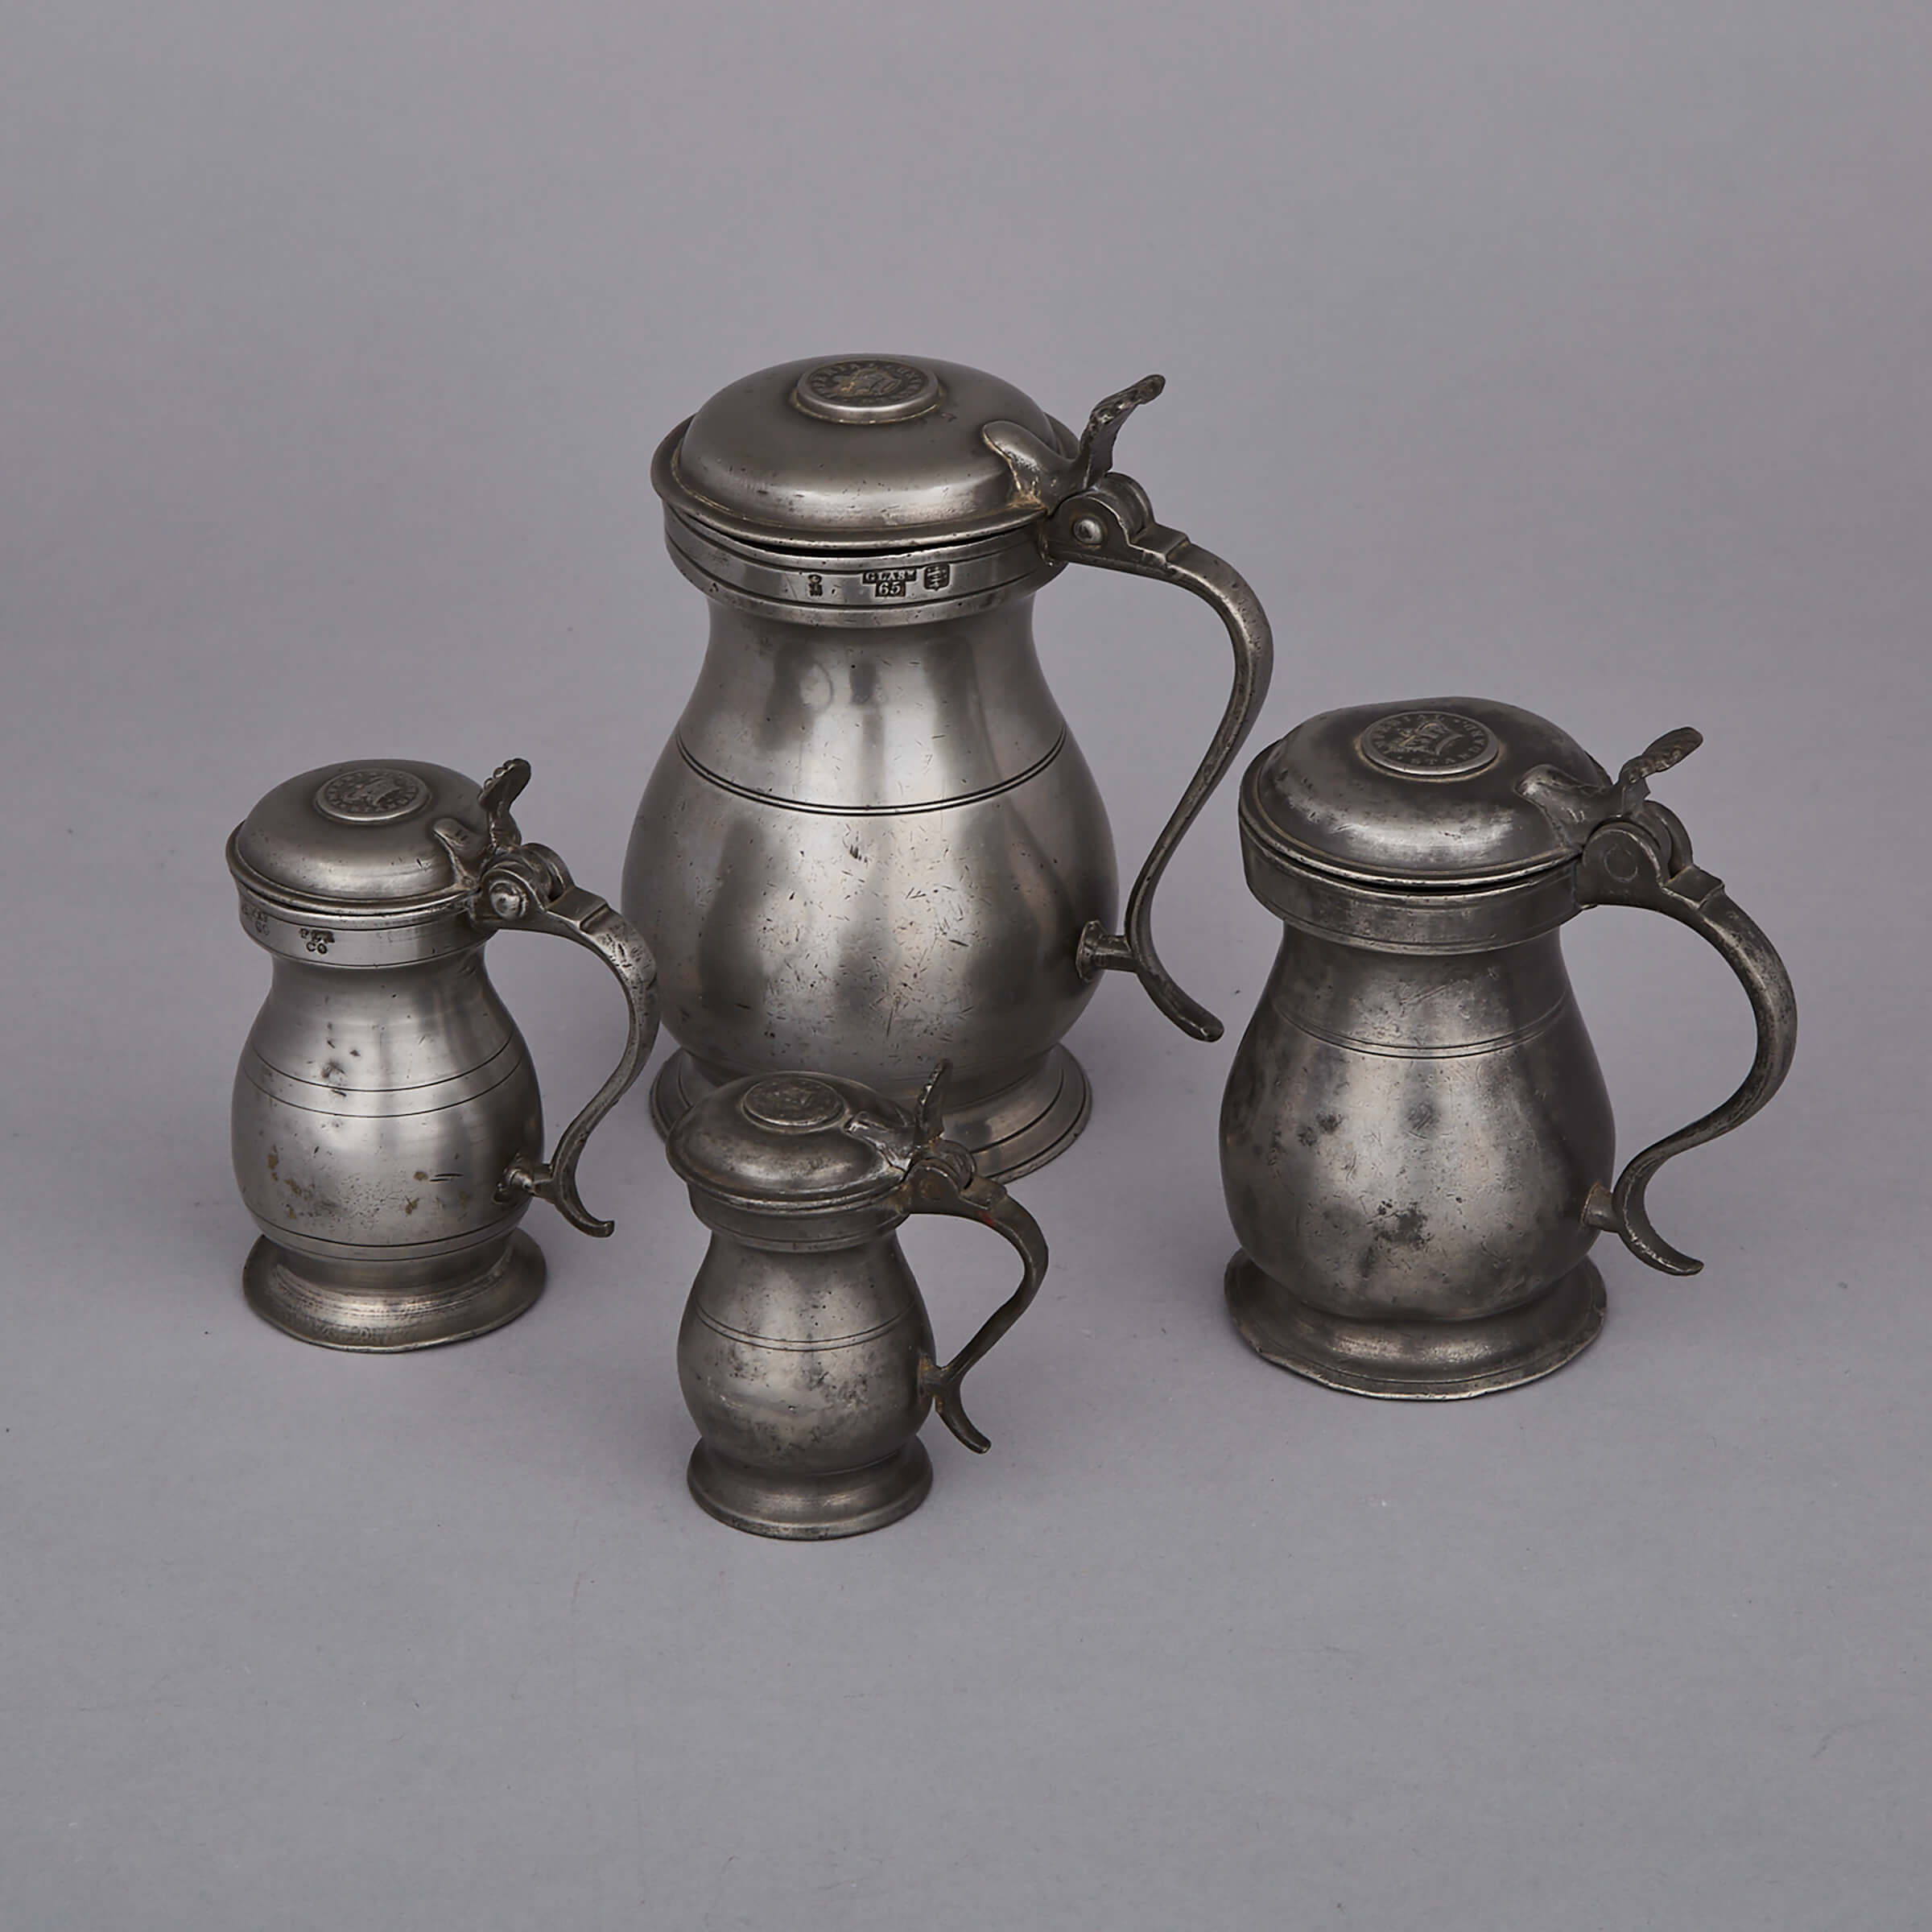 Four Scottish Graduated Pewter Lidded Measures, 18th/19th centuries